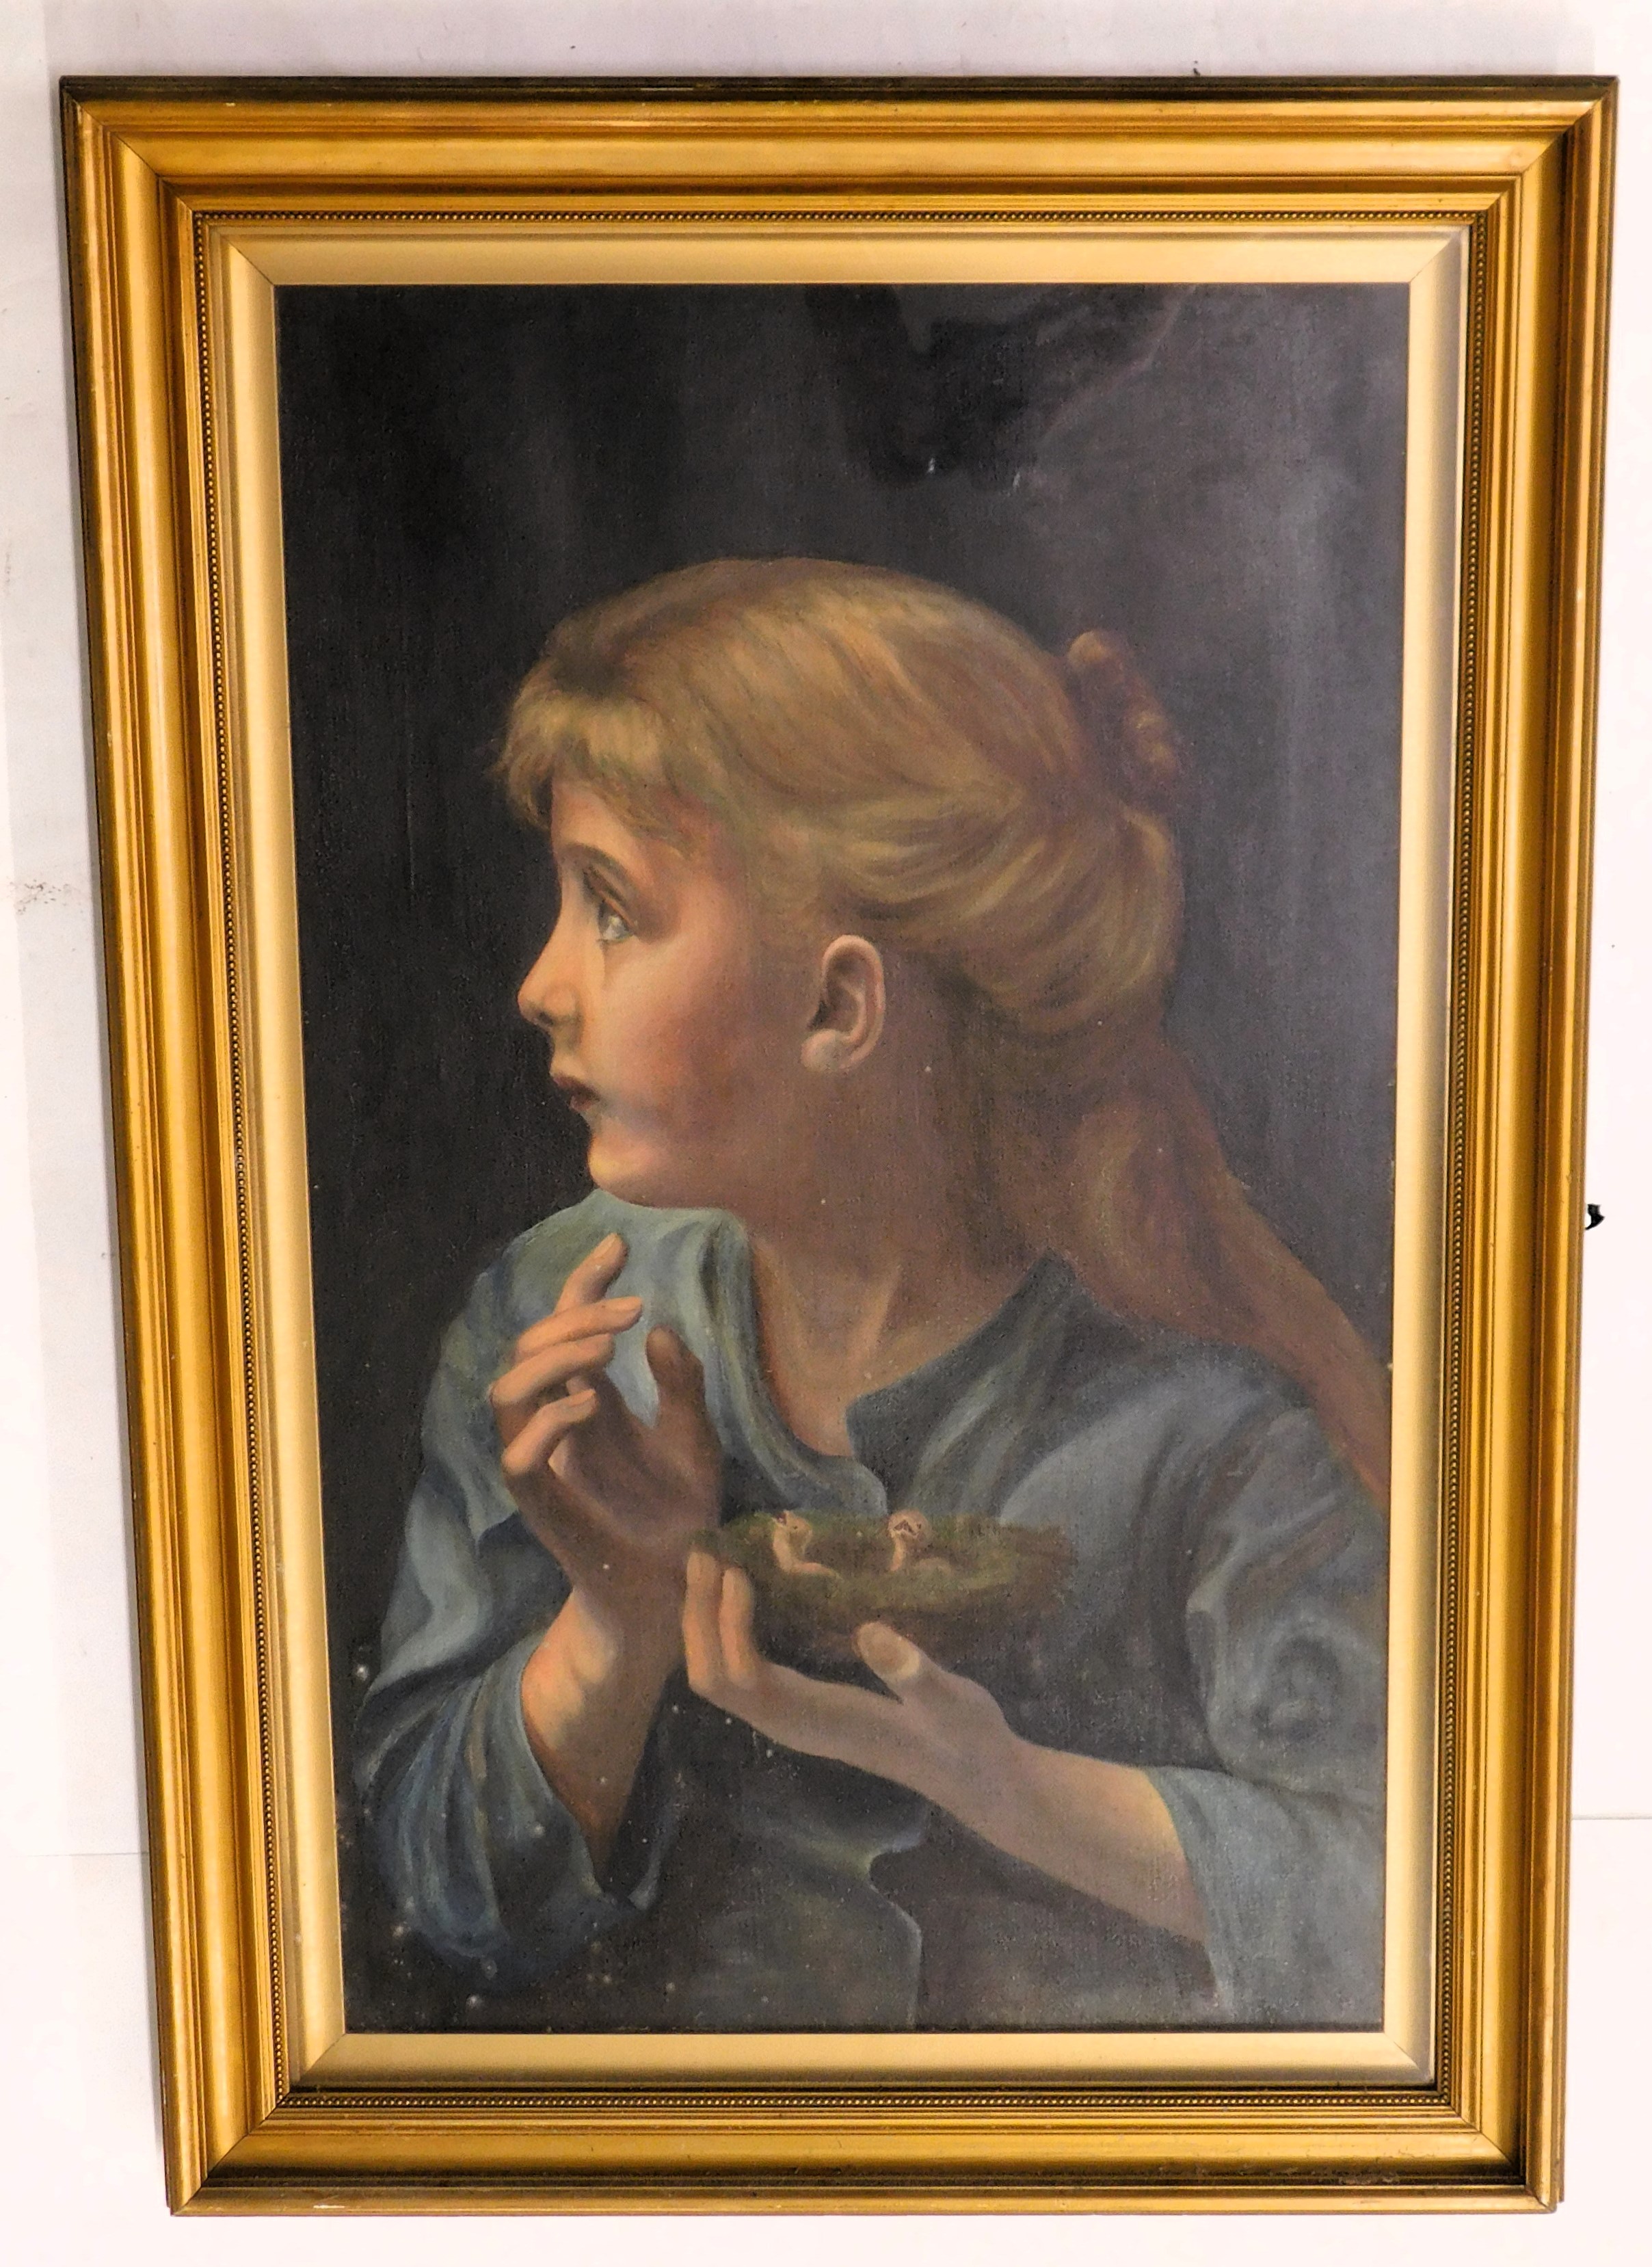 19thC British School. Young girl holding chicks, oil on canvas, 65cm x 40cm. - Image 2 of 4